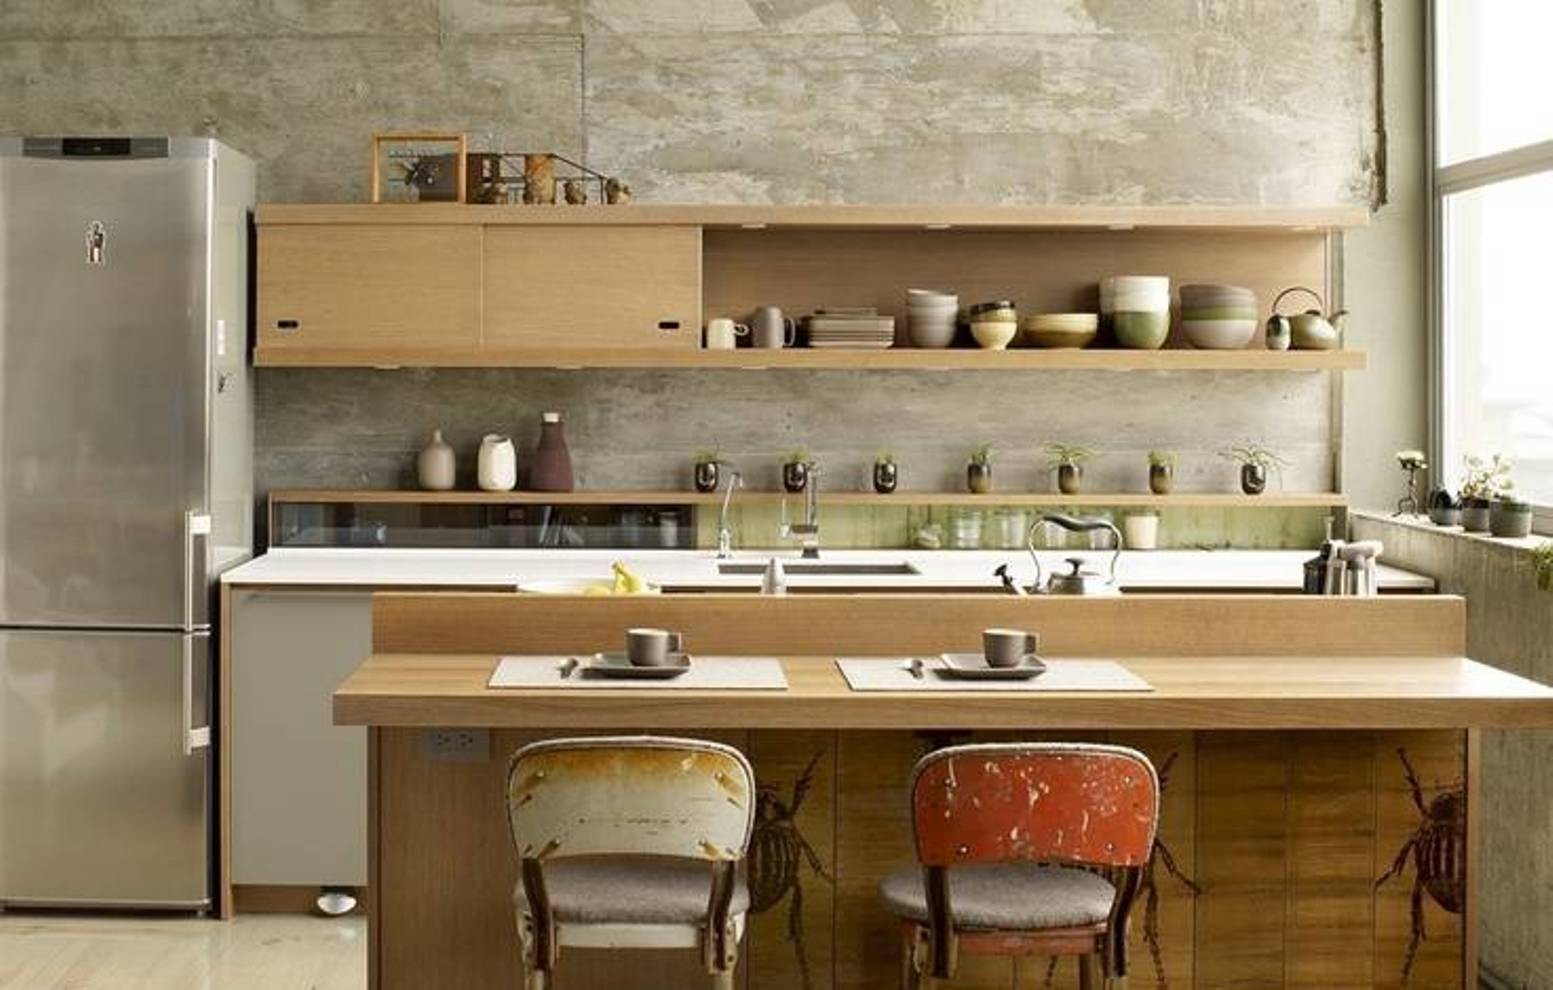 Modern Japanese Kitchen Designs for Sophistication and Simplicity